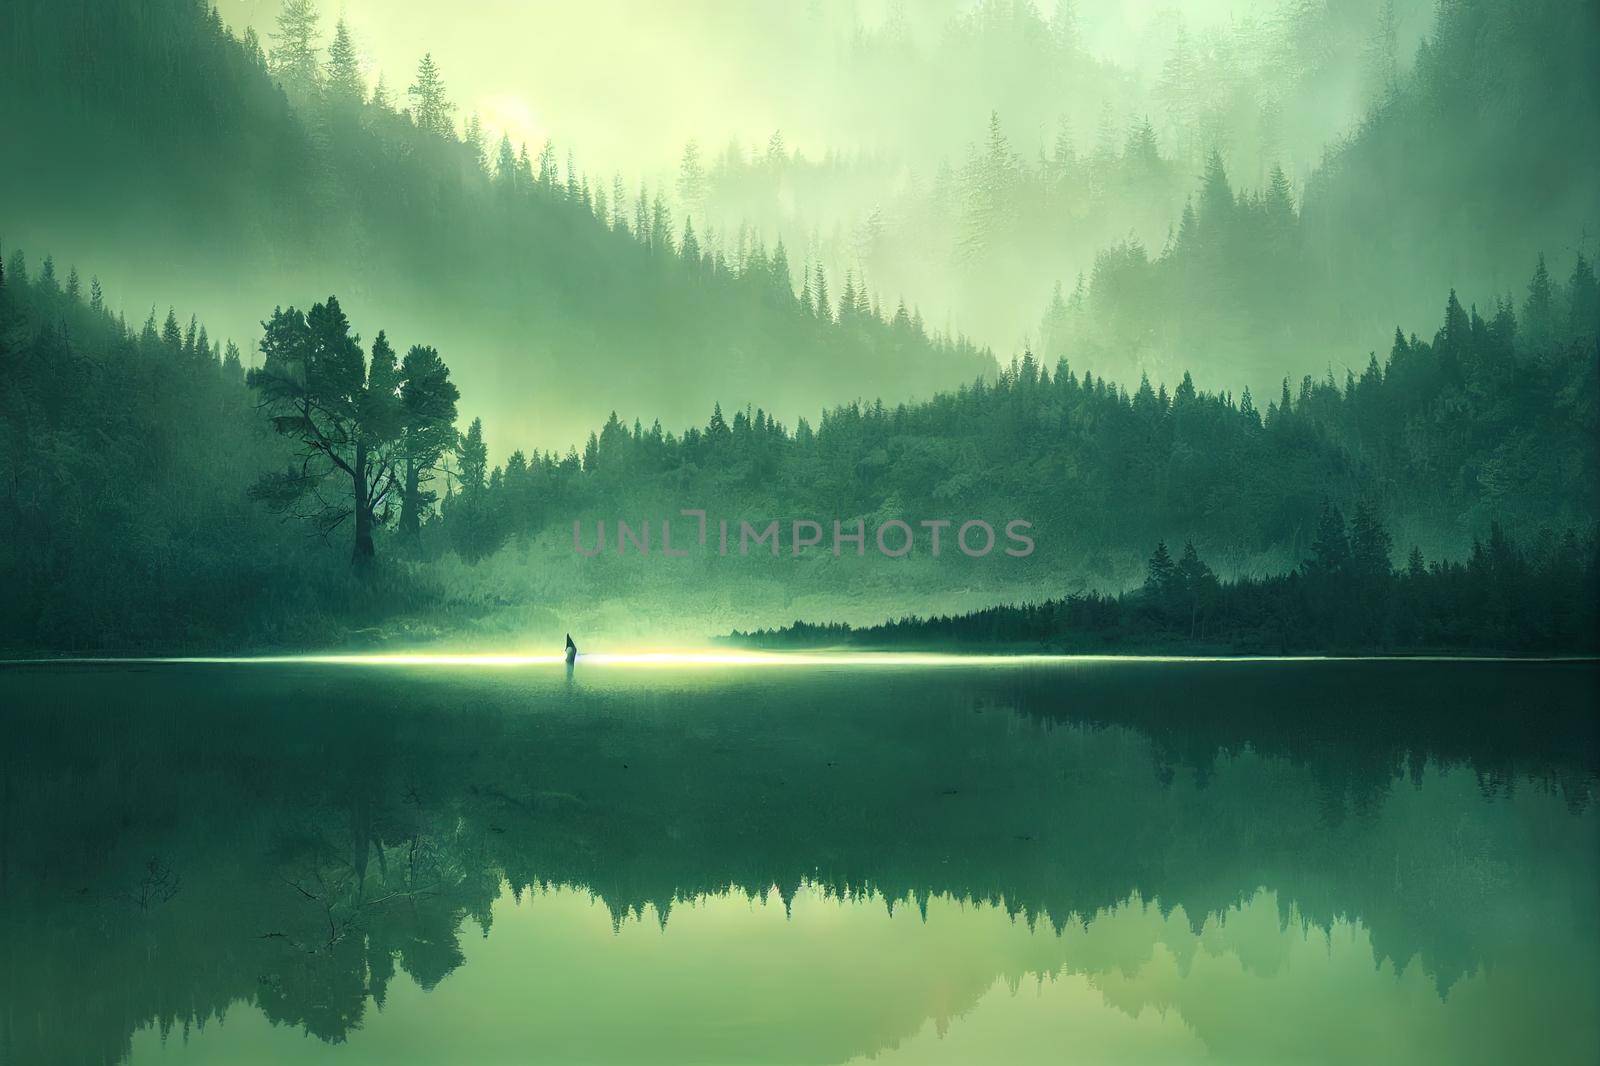 forest with reflection in lake and man silhouette by 2ragon